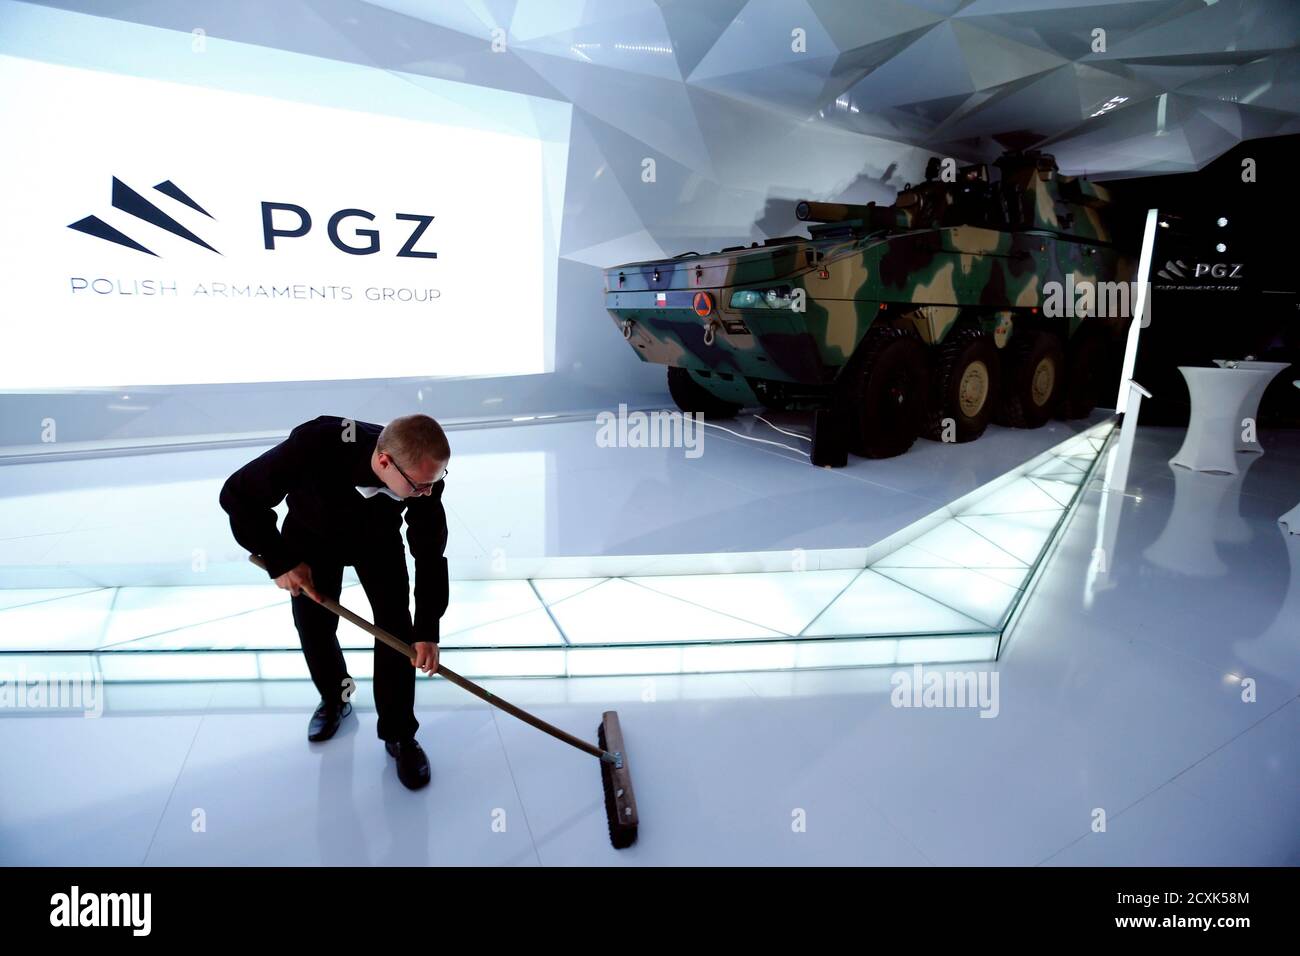 A man cleans the floor near an Armored Modular Vehicle 'Rosomak' at the Polish Arms Group (PGZ) stand at an international military fair in Kielce, southern Poland September 2, 2014. Poland on Wednesday brought small defence manufacturers into a consortium big enough to bid, alongside foreign majors, for a share of the country's $40 billion military modernisation pot. The PGZ, set to comprise over 30 companies ranging from a shipyard to a high-tech graphene manufacturer, will allow the country's fragmented industry to compete for state tenders against large foreign companies. Picture taken on S Stock Photo